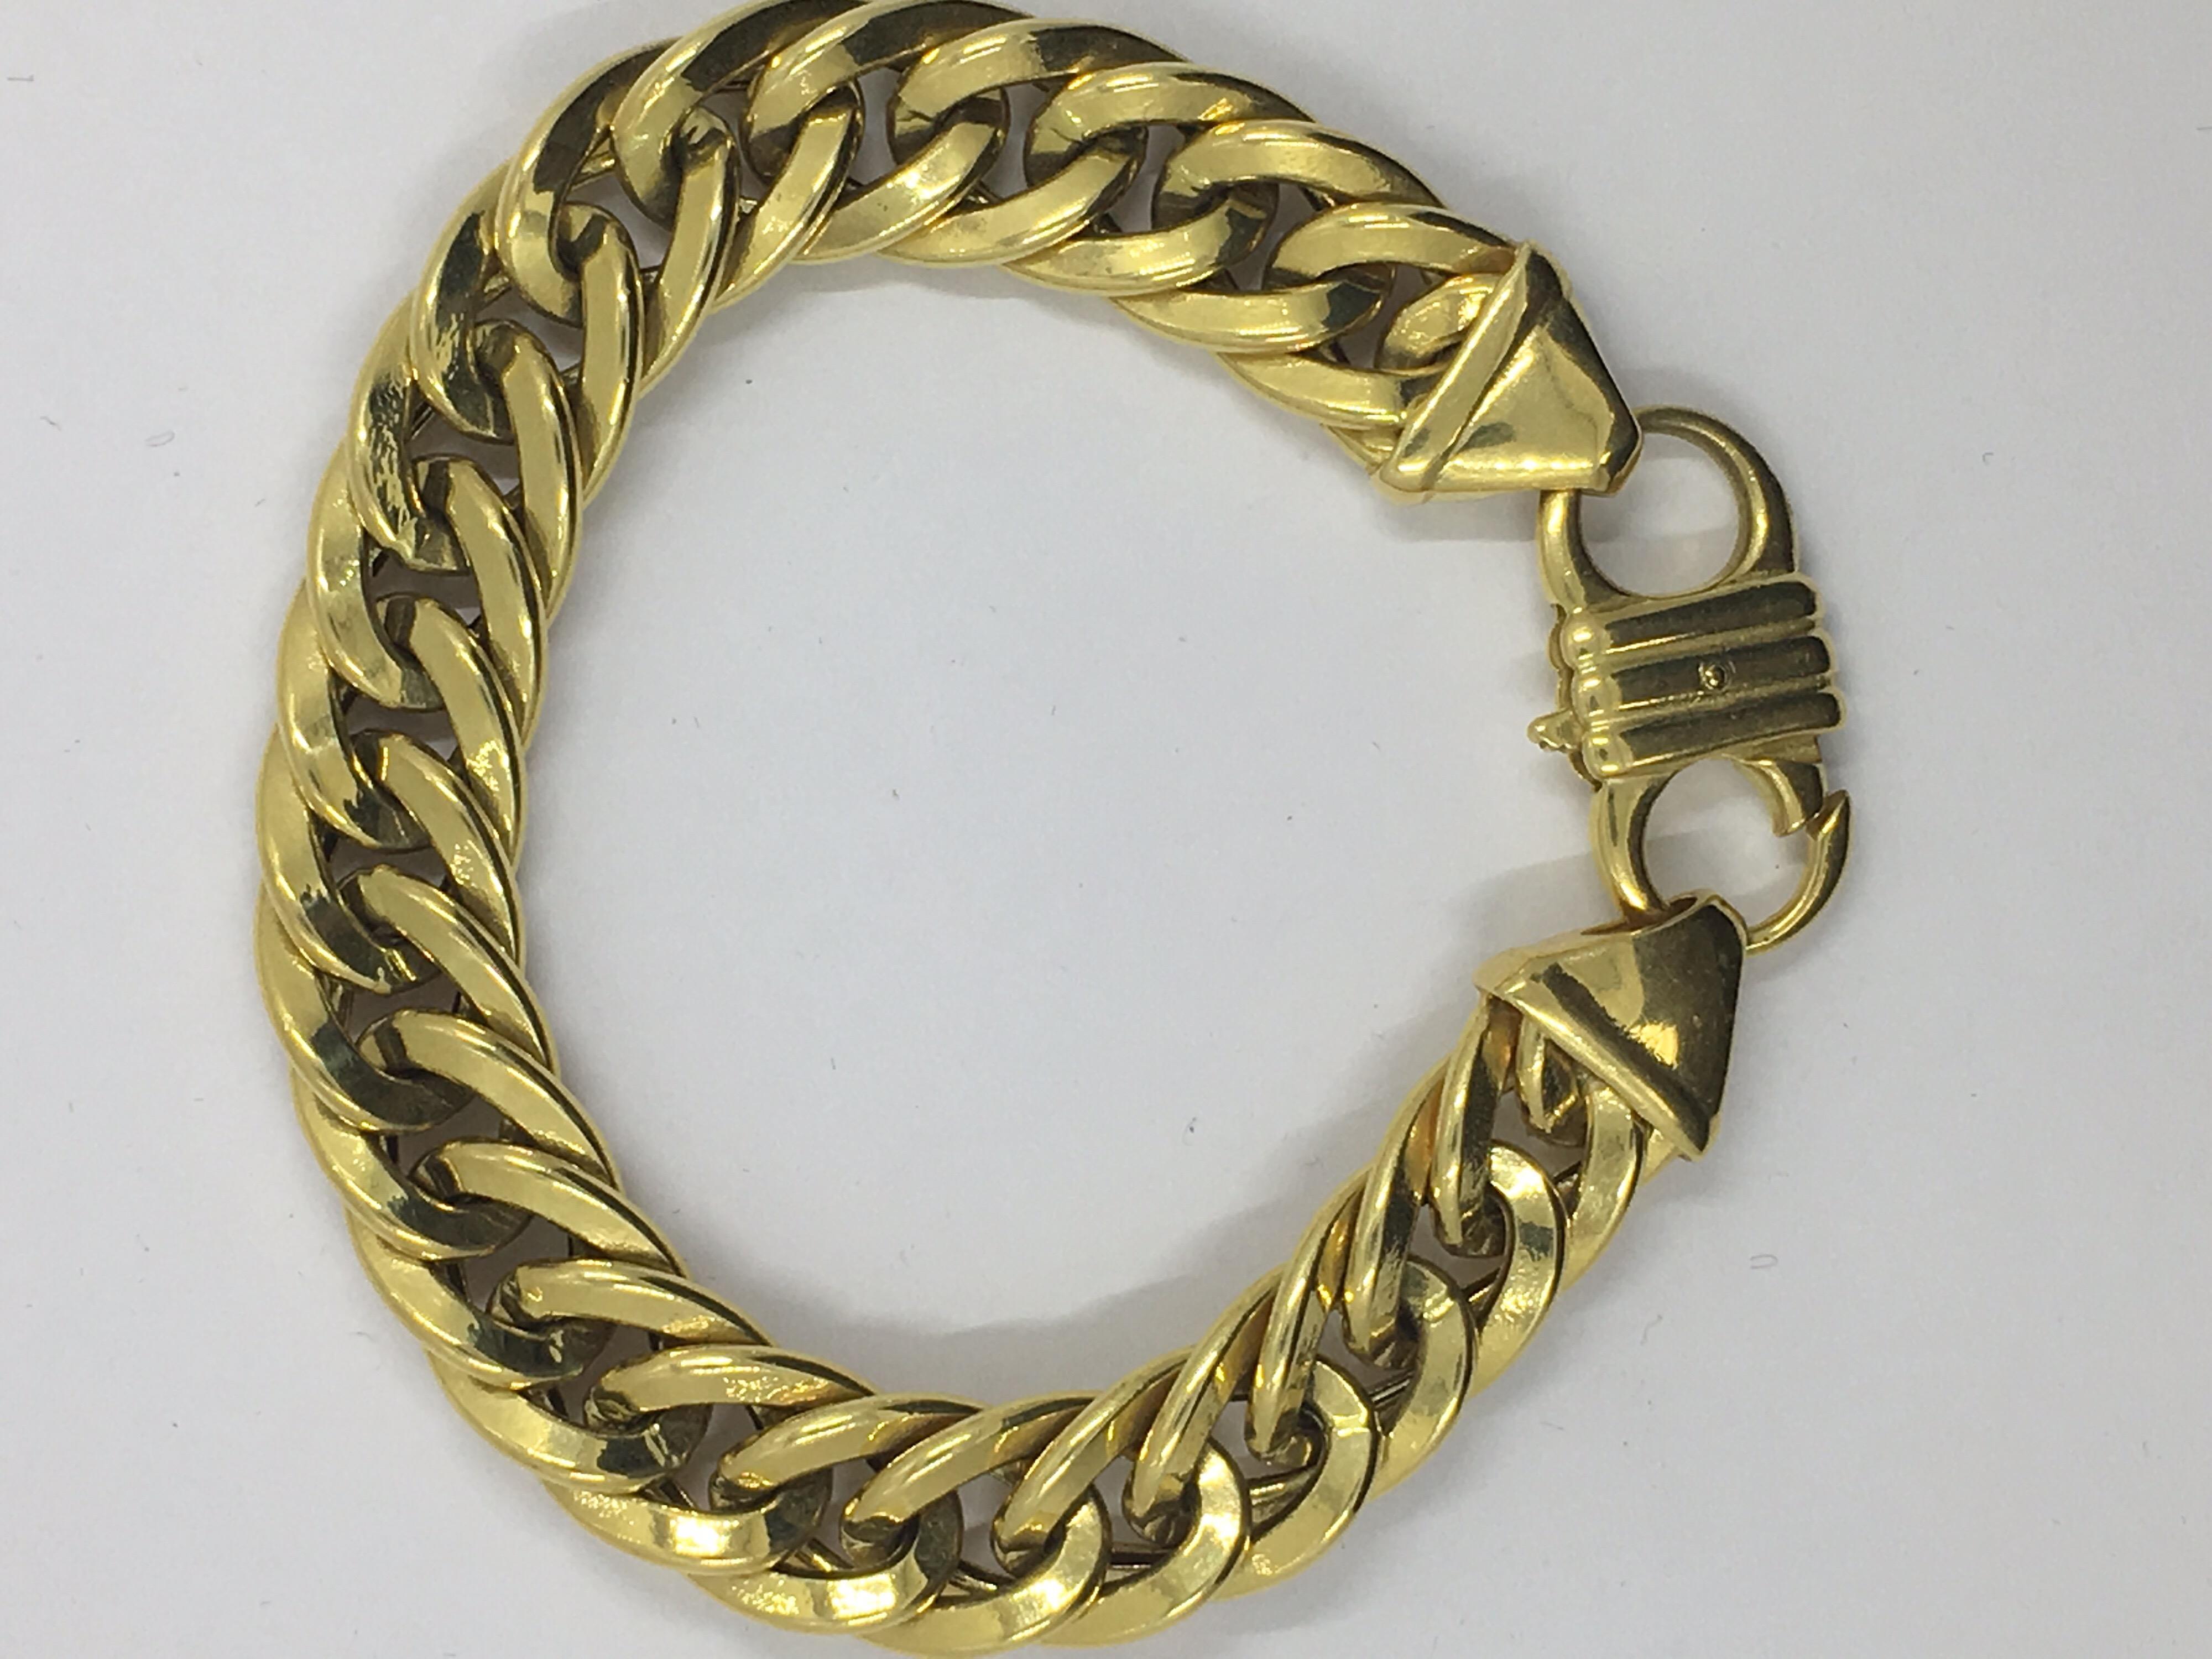 18 Kt Yellow Gold Link Bracelet 
Made in Italy
